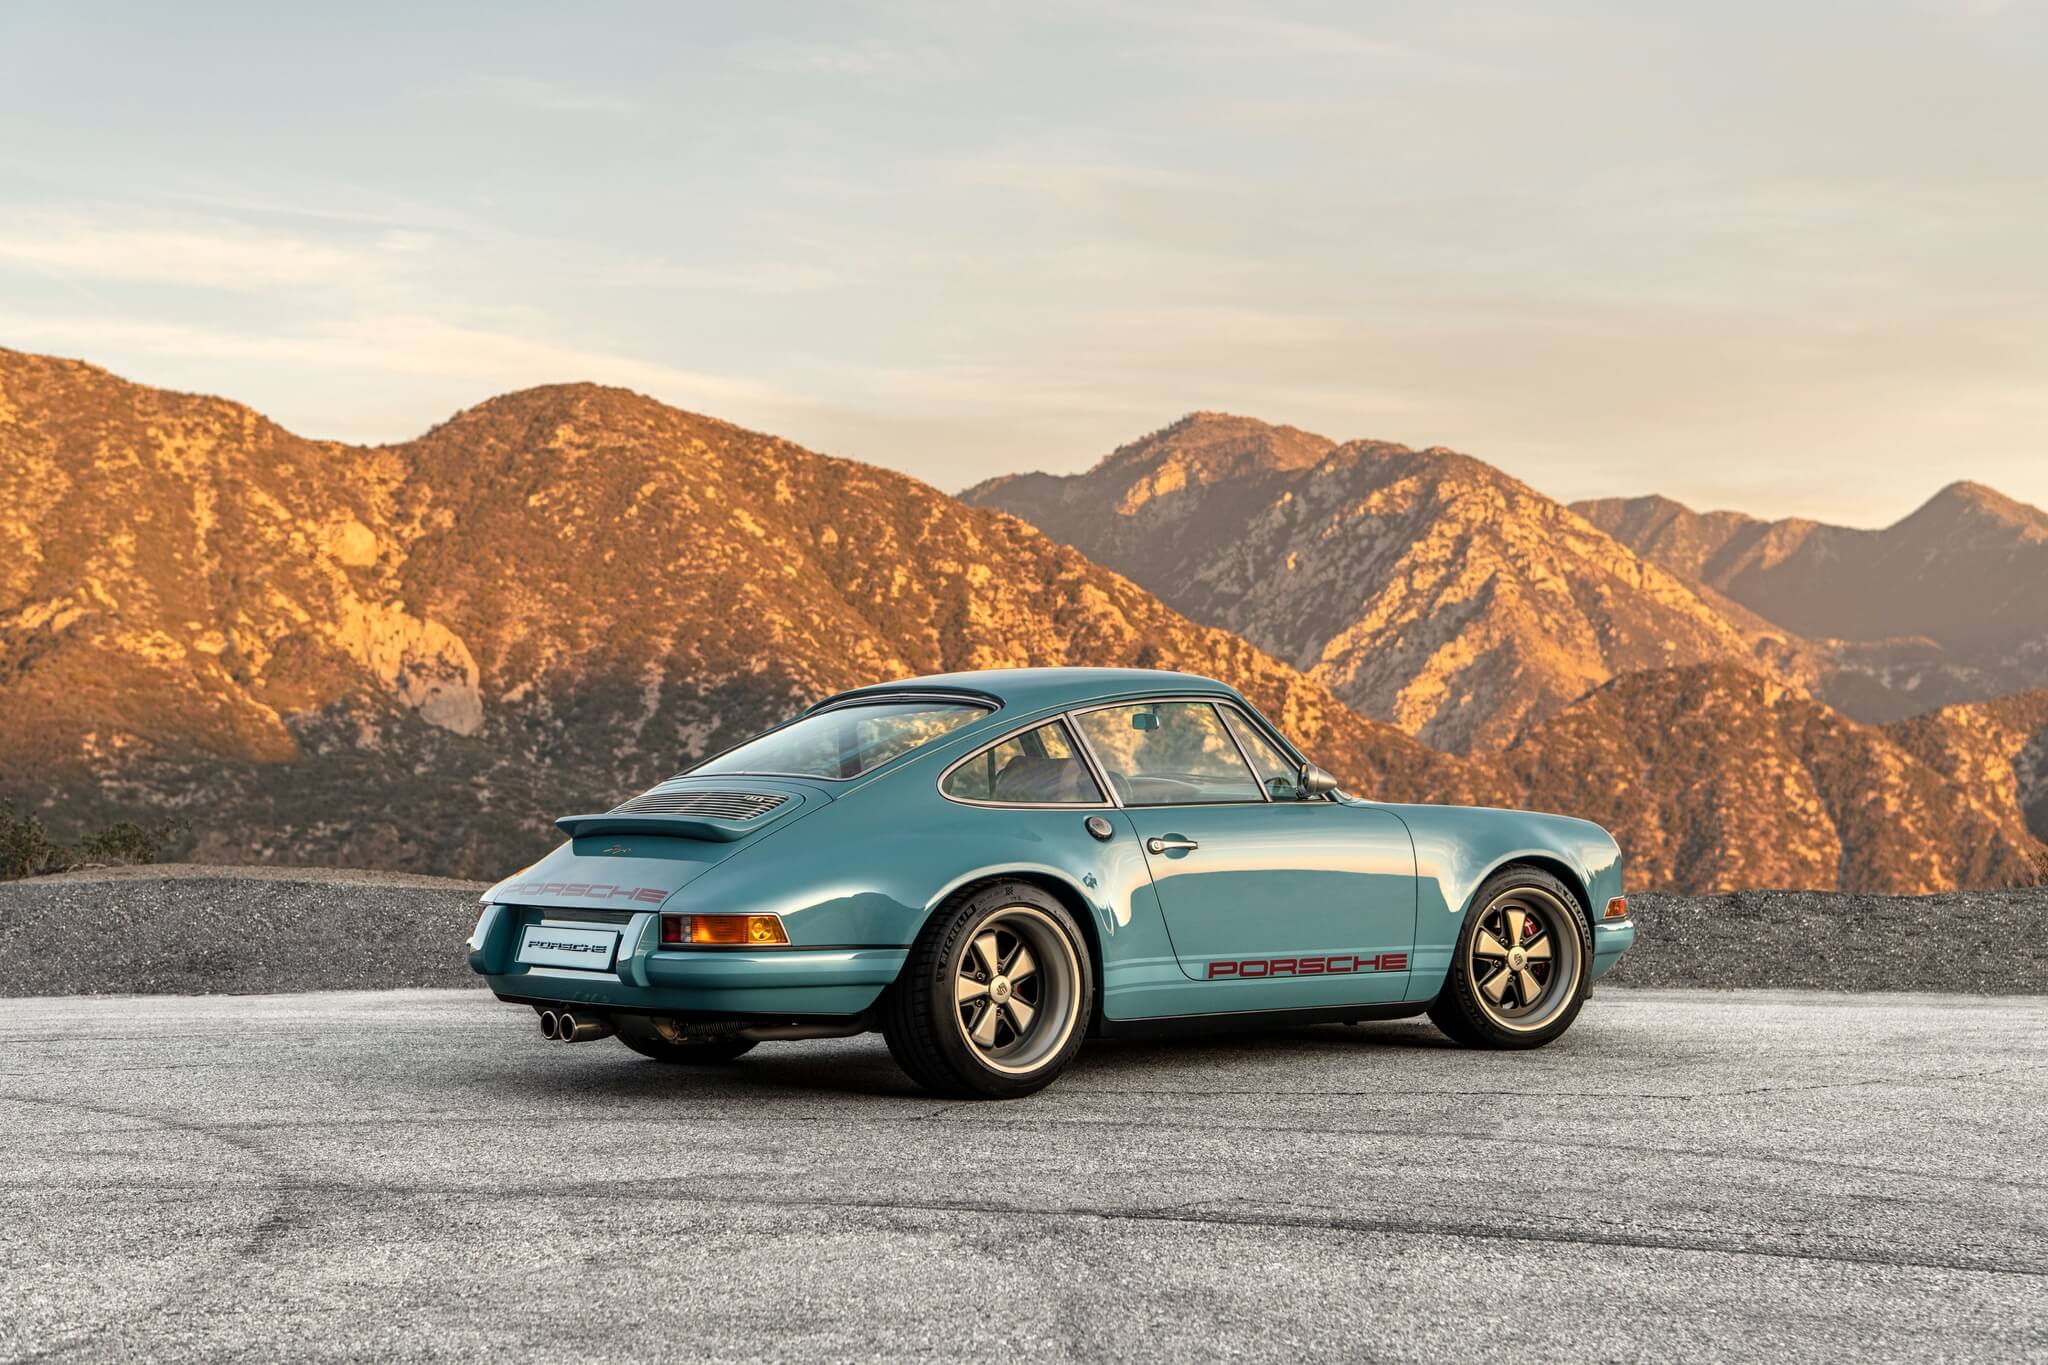 One-Of-A-Kind 1989 Porsche 911 Is Now For Sale On PCarMarket!